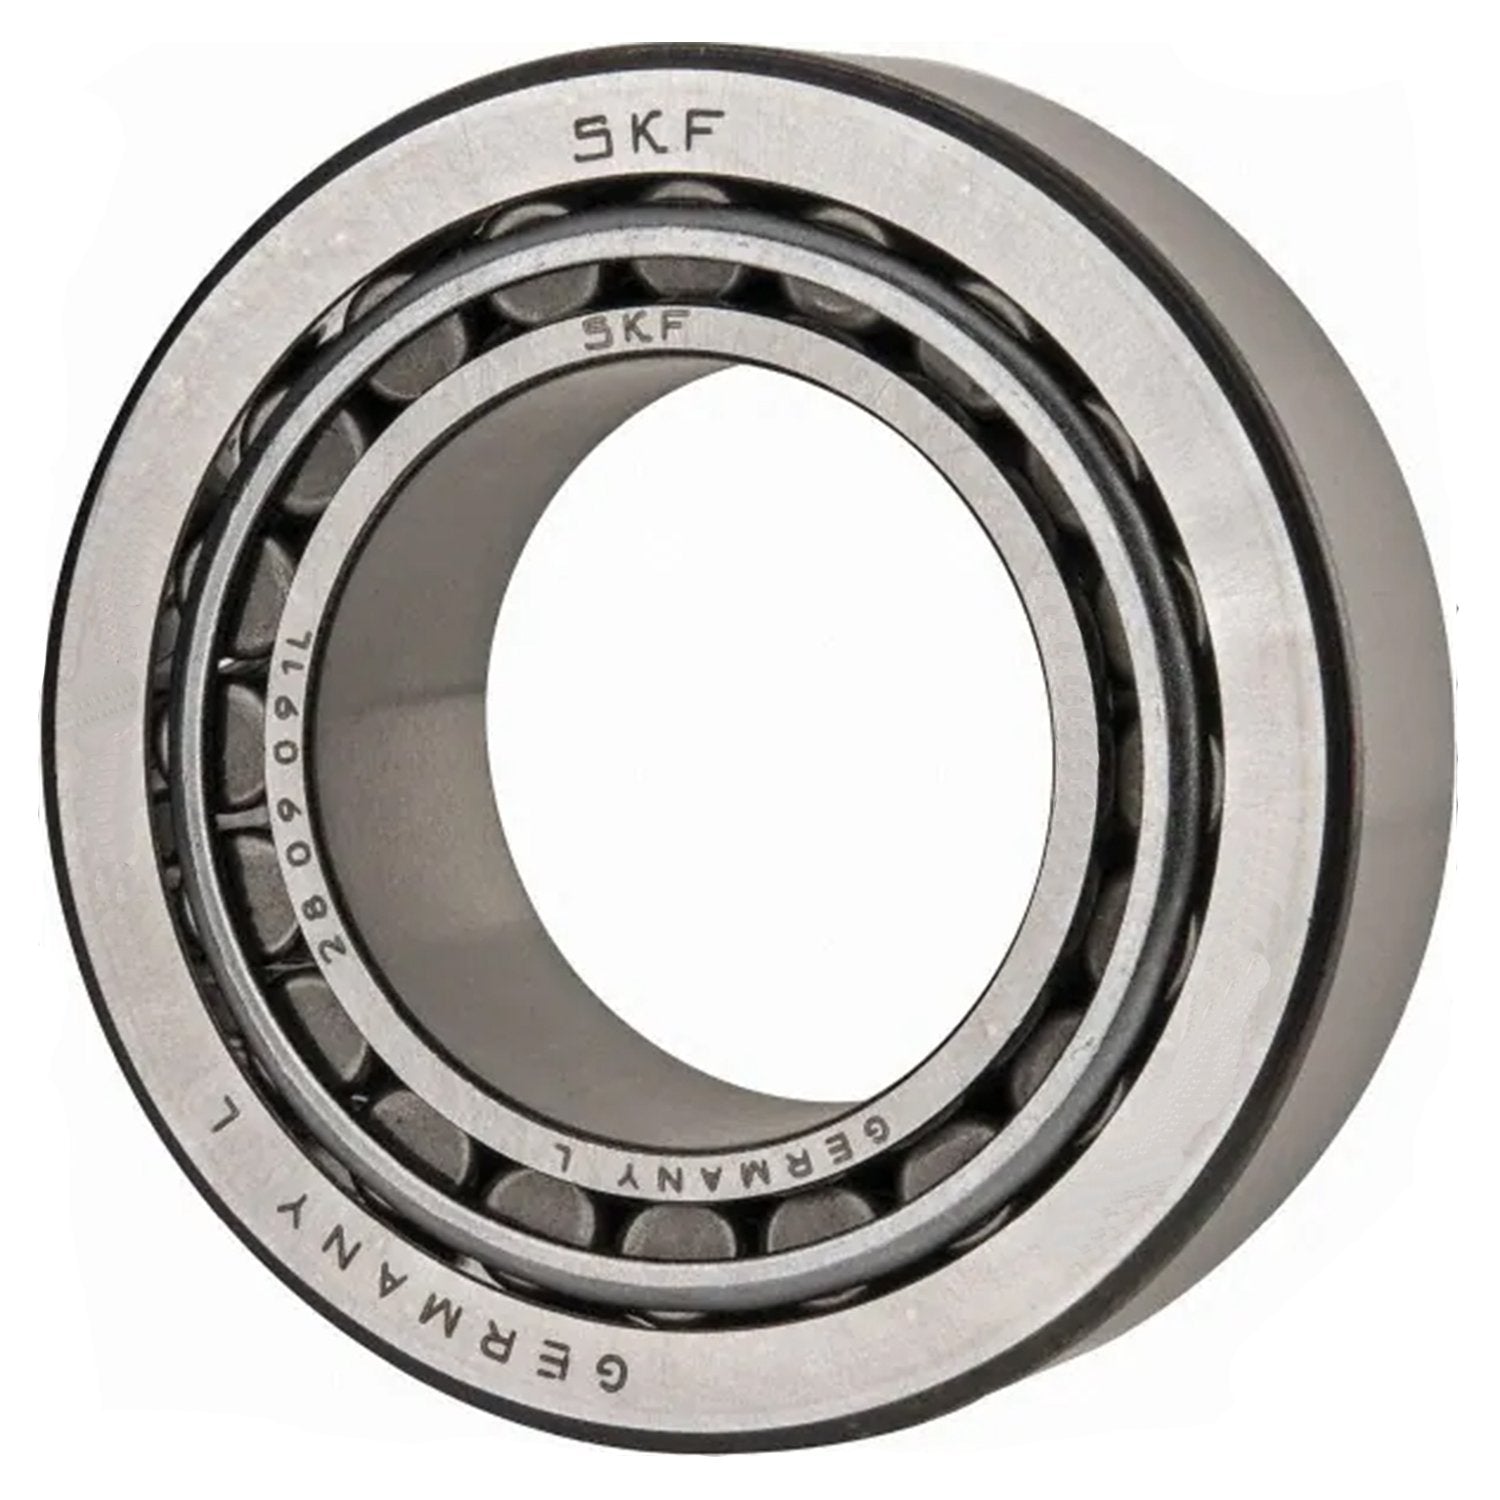 1988/1922/Q SKF Tapered roller bearing 28.575x57.15x19.845